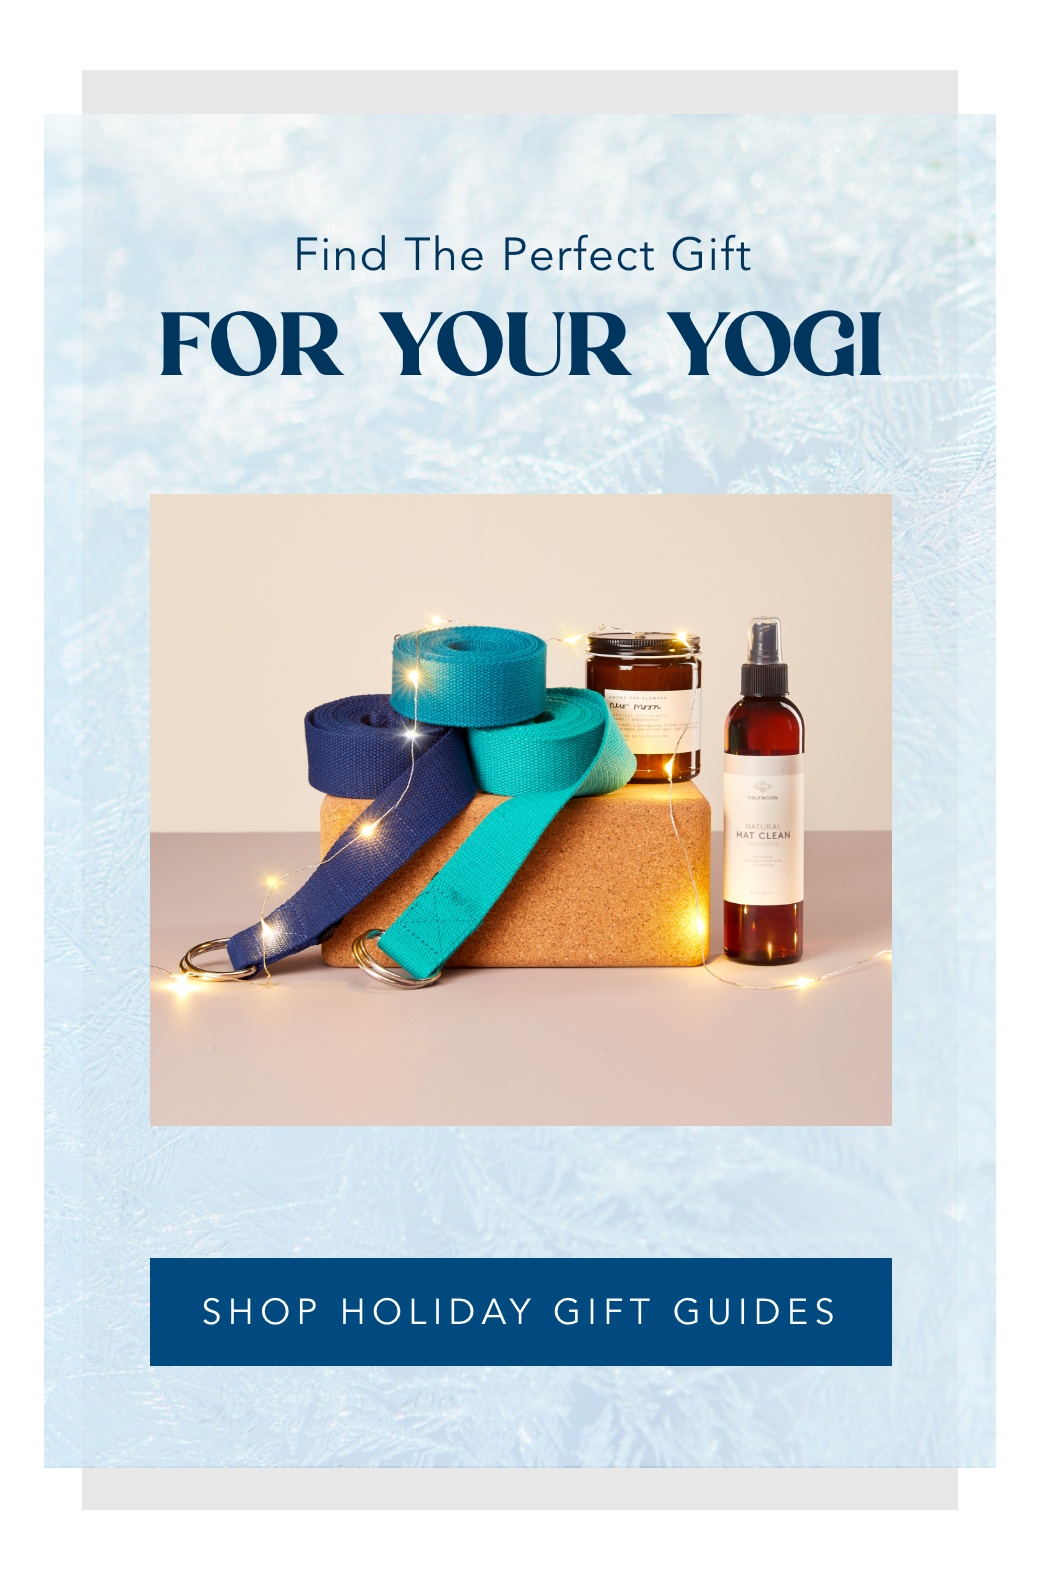 Find the perfect gift for your yogi